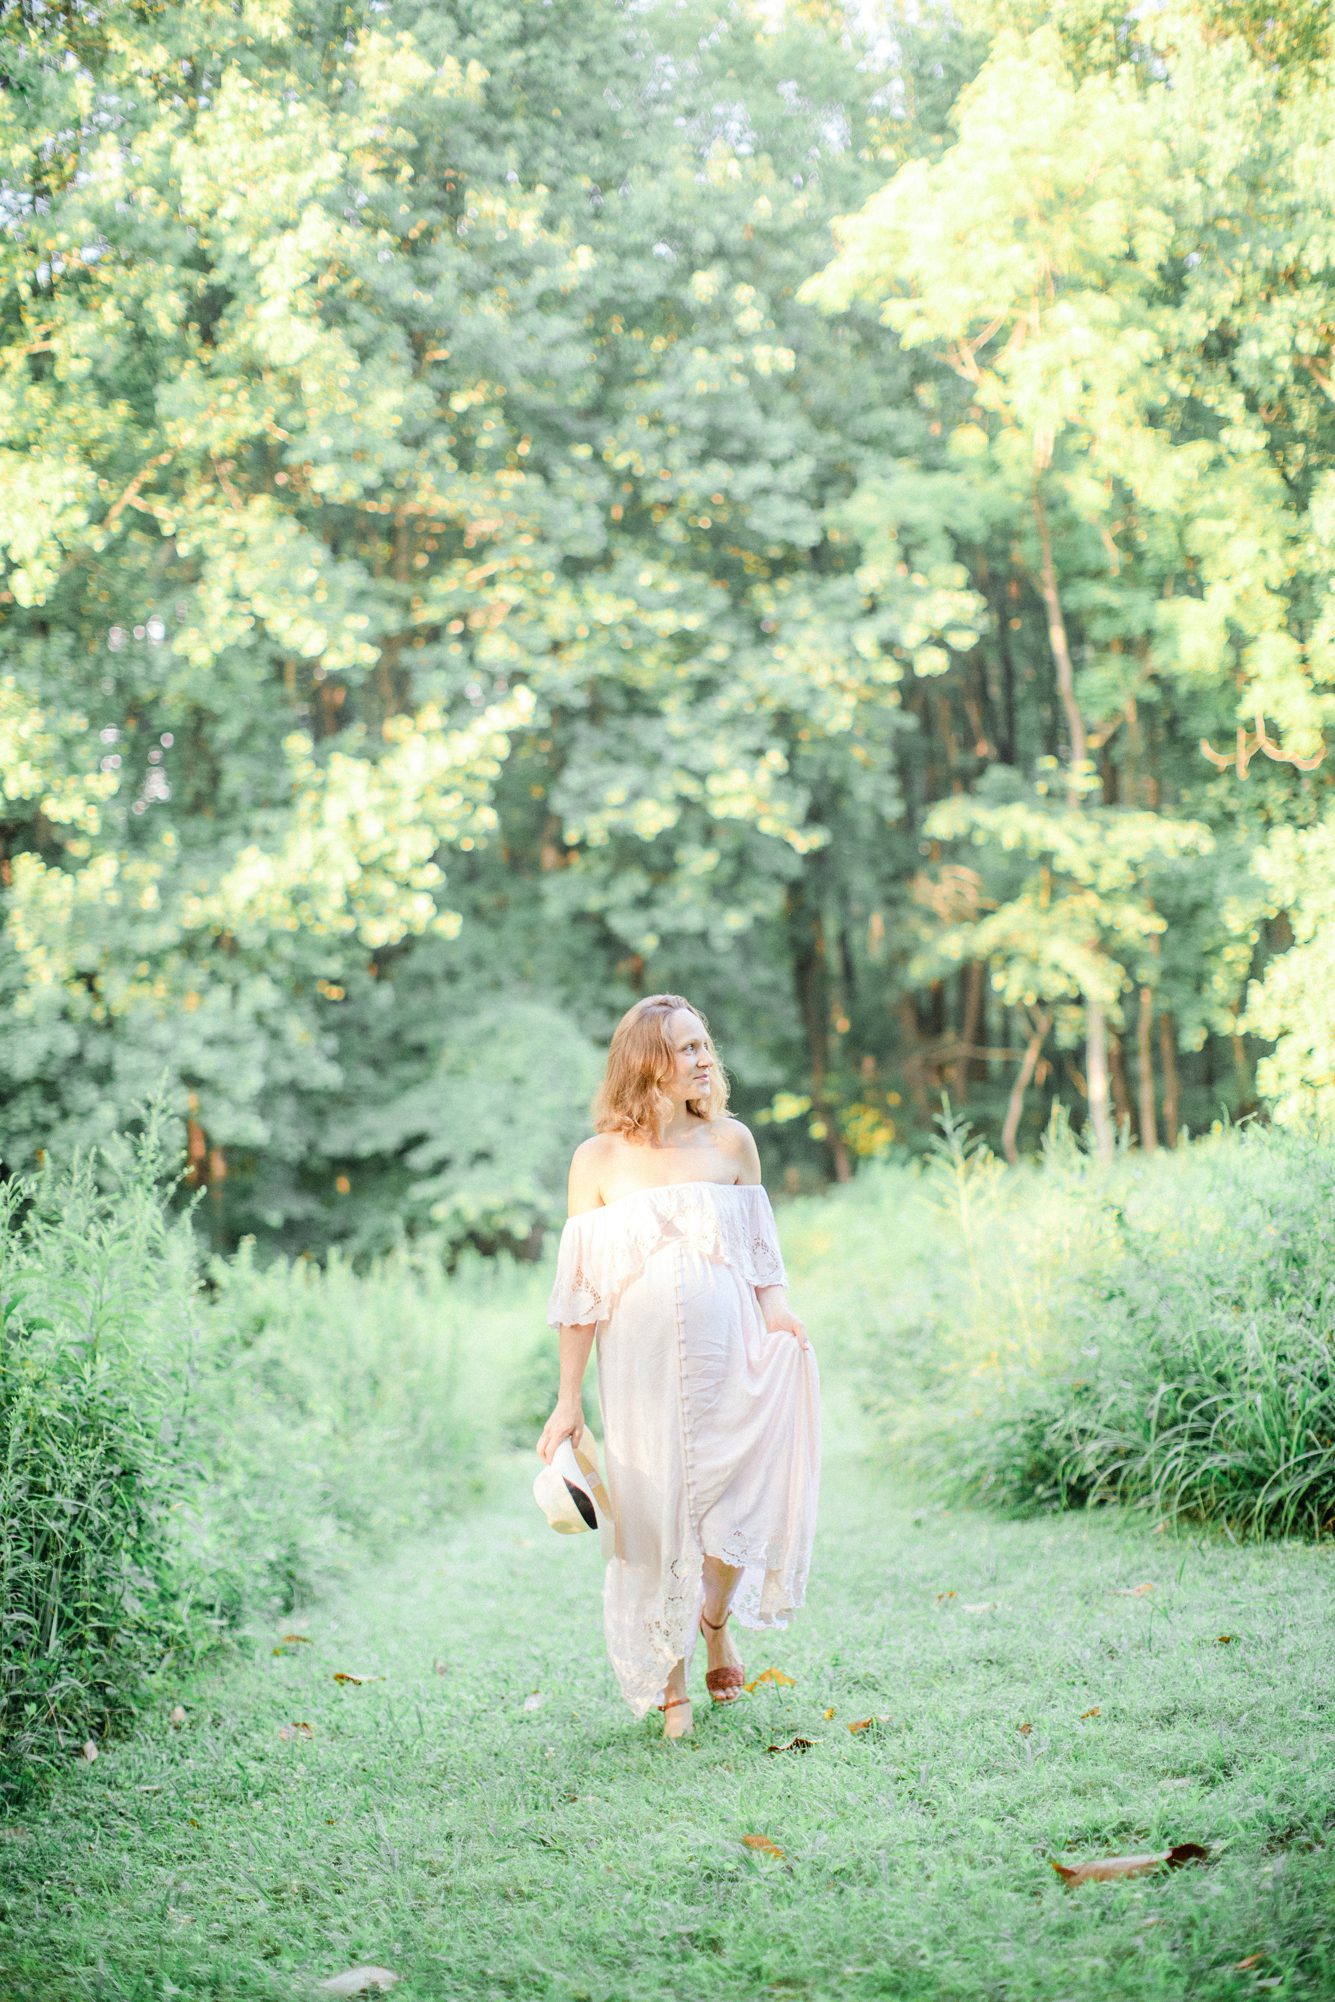 Maternity session in field during golden hour in Chevy Chase MD. Photo by LRG Portraits.